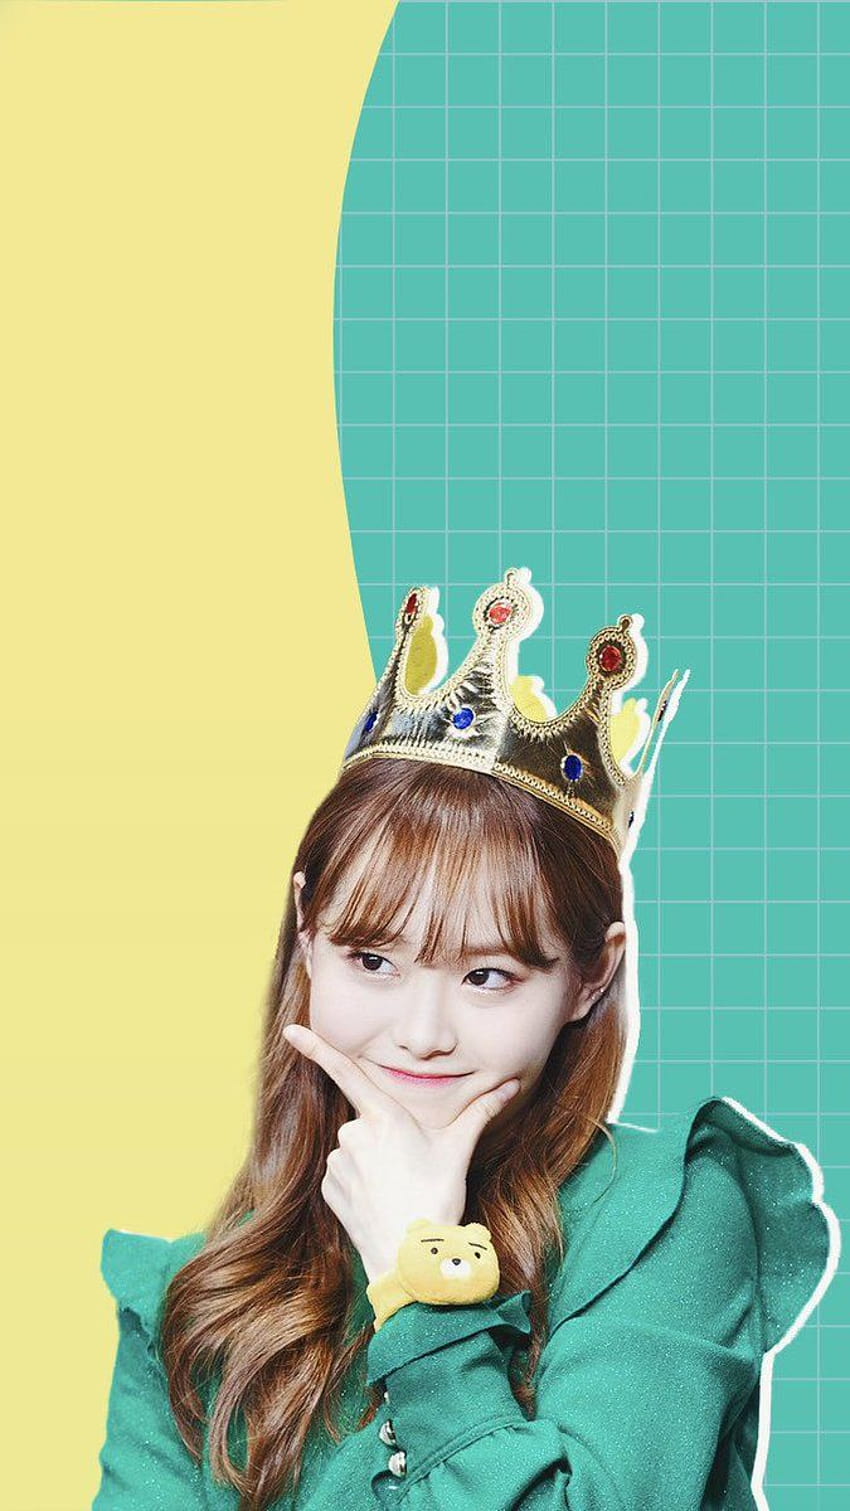 gowon doing things ✧ˊ˗ on Twitter:, loona chuu HD phone wallpaper